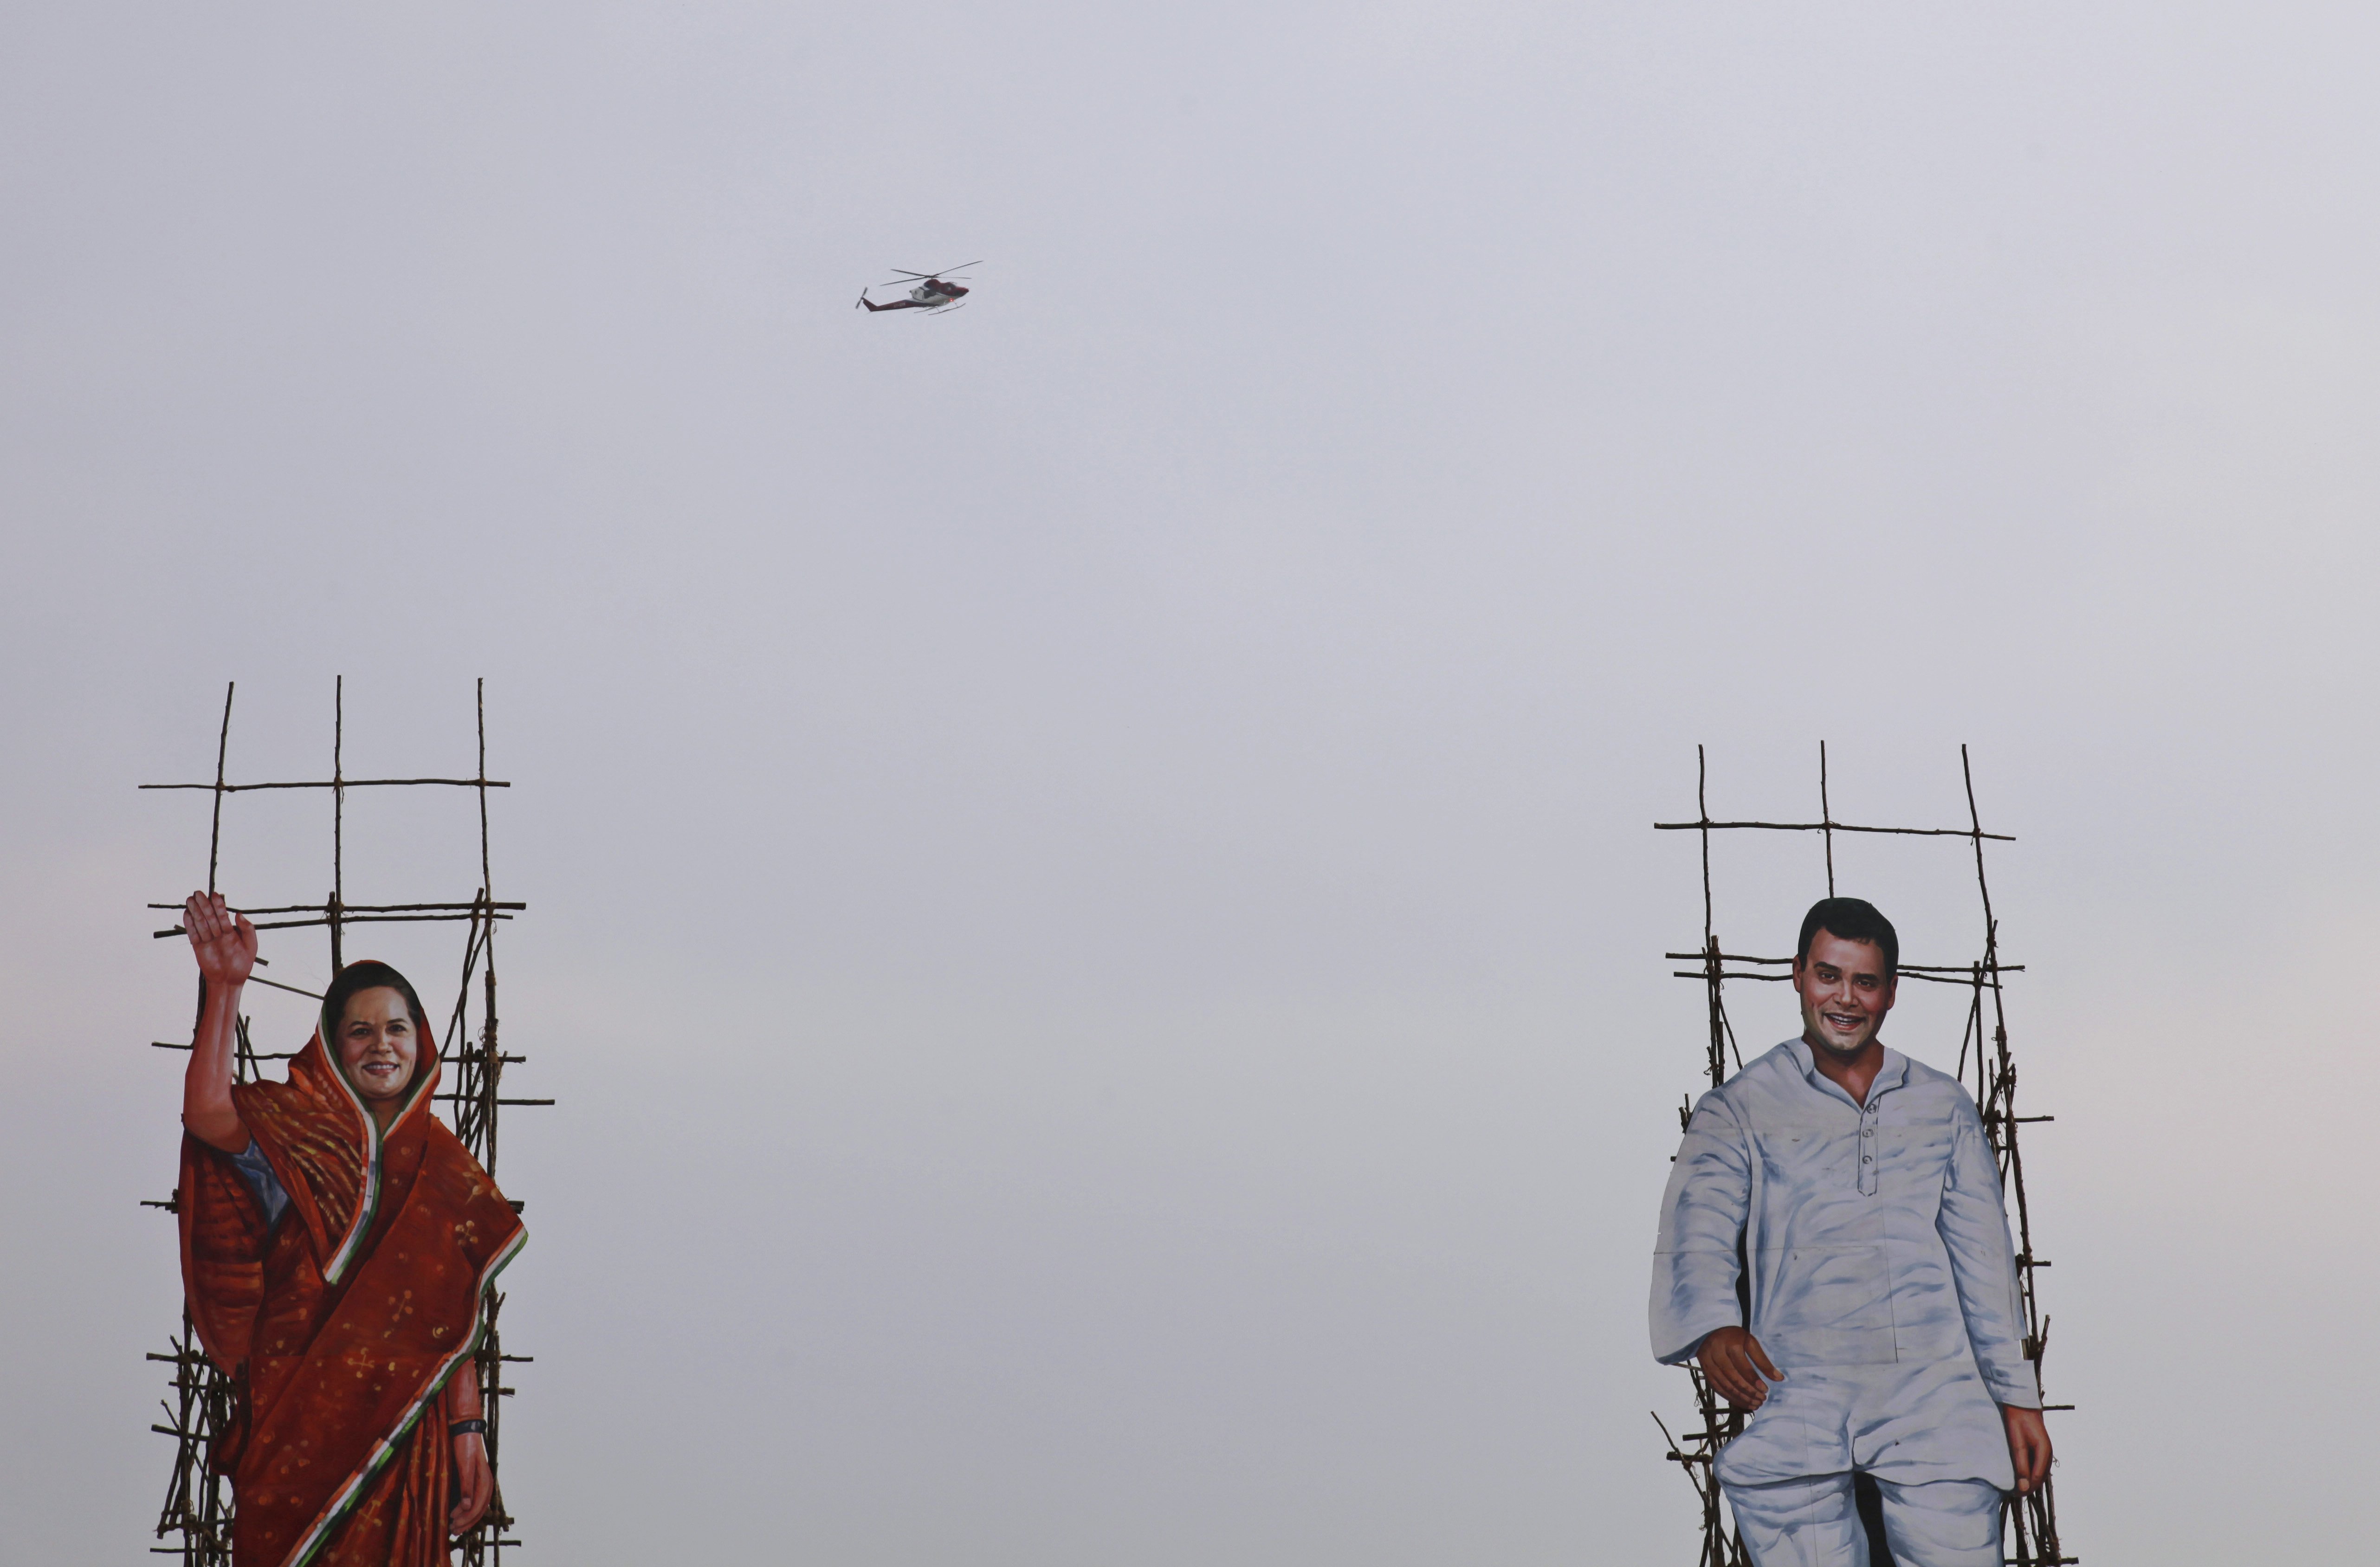 Apr. 16, 2014. A helicopter carrying Congress party president Sonia Gandhi arrives at an election rally in Karimnagar, about 165 kilometers (103 miles)  from Hyderabad, India. The multiphase voting across the country runs until May 12.